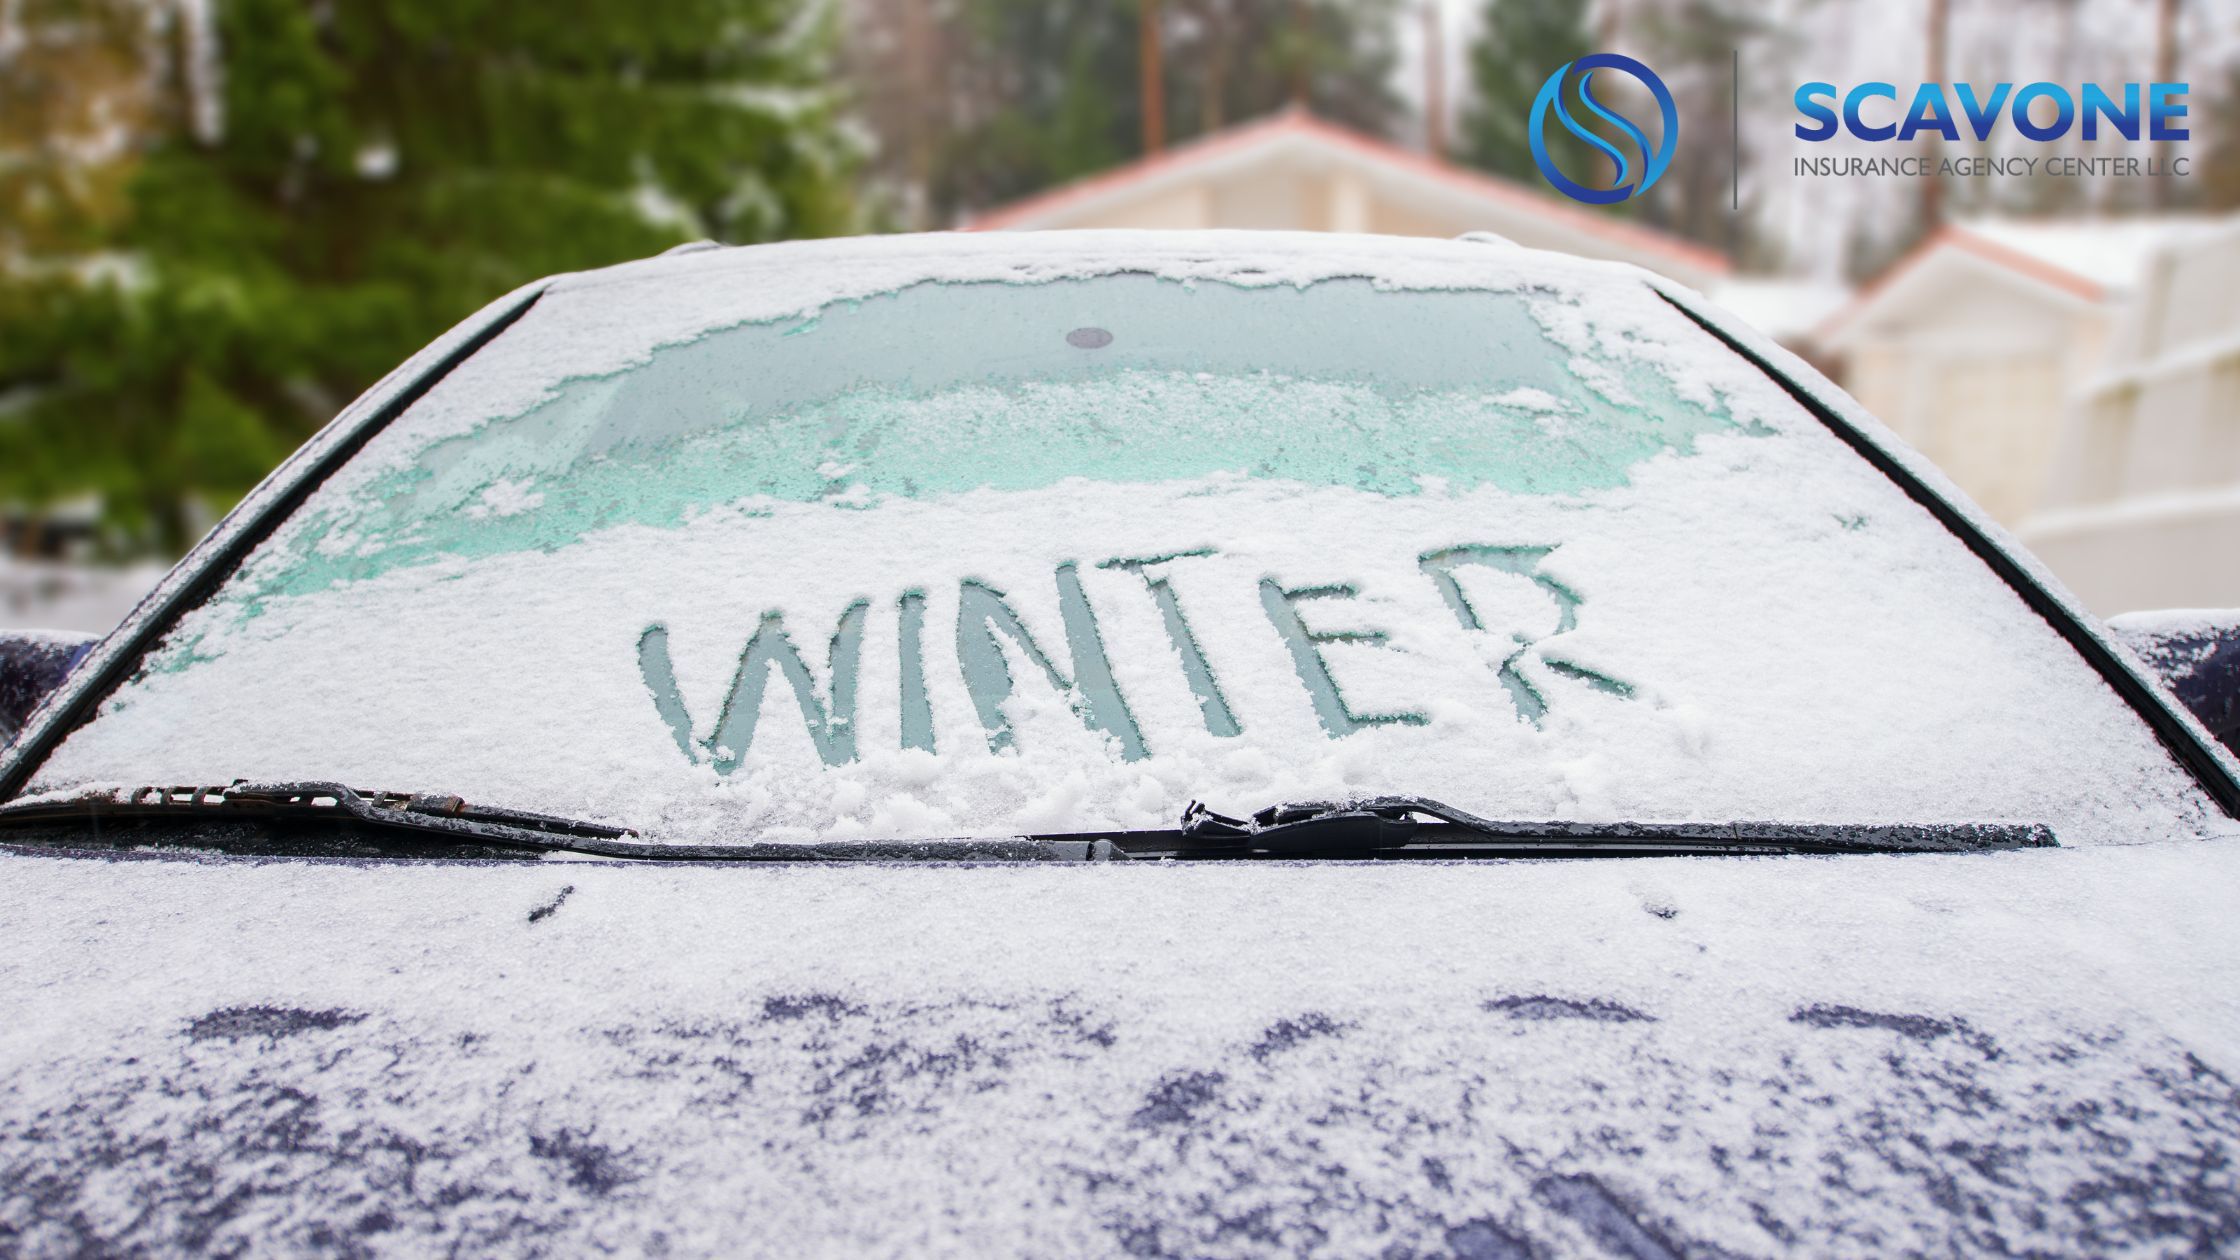 Make Yourself Prepare for Winter to Help Avoid Potential Insurance Claims